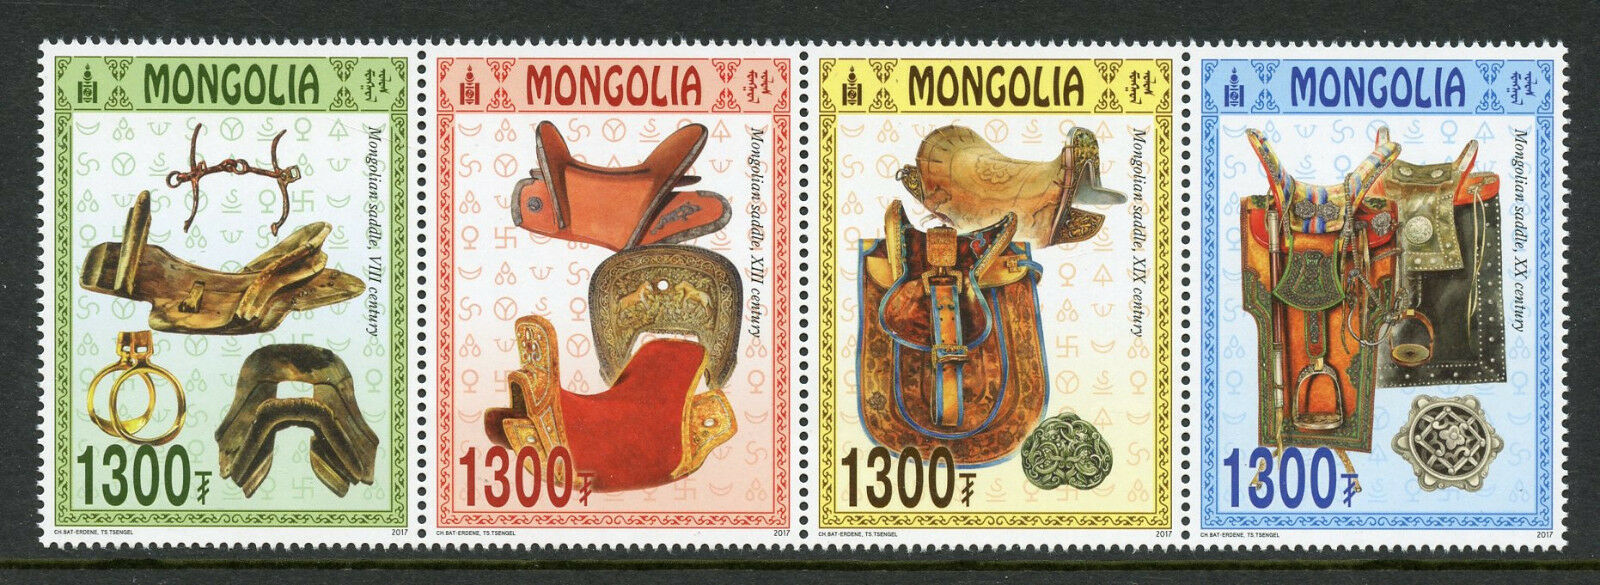 Mongolia 2017 MNH Horse Saddles 4v Strip Cultures Ethnicities Traditions Stamps